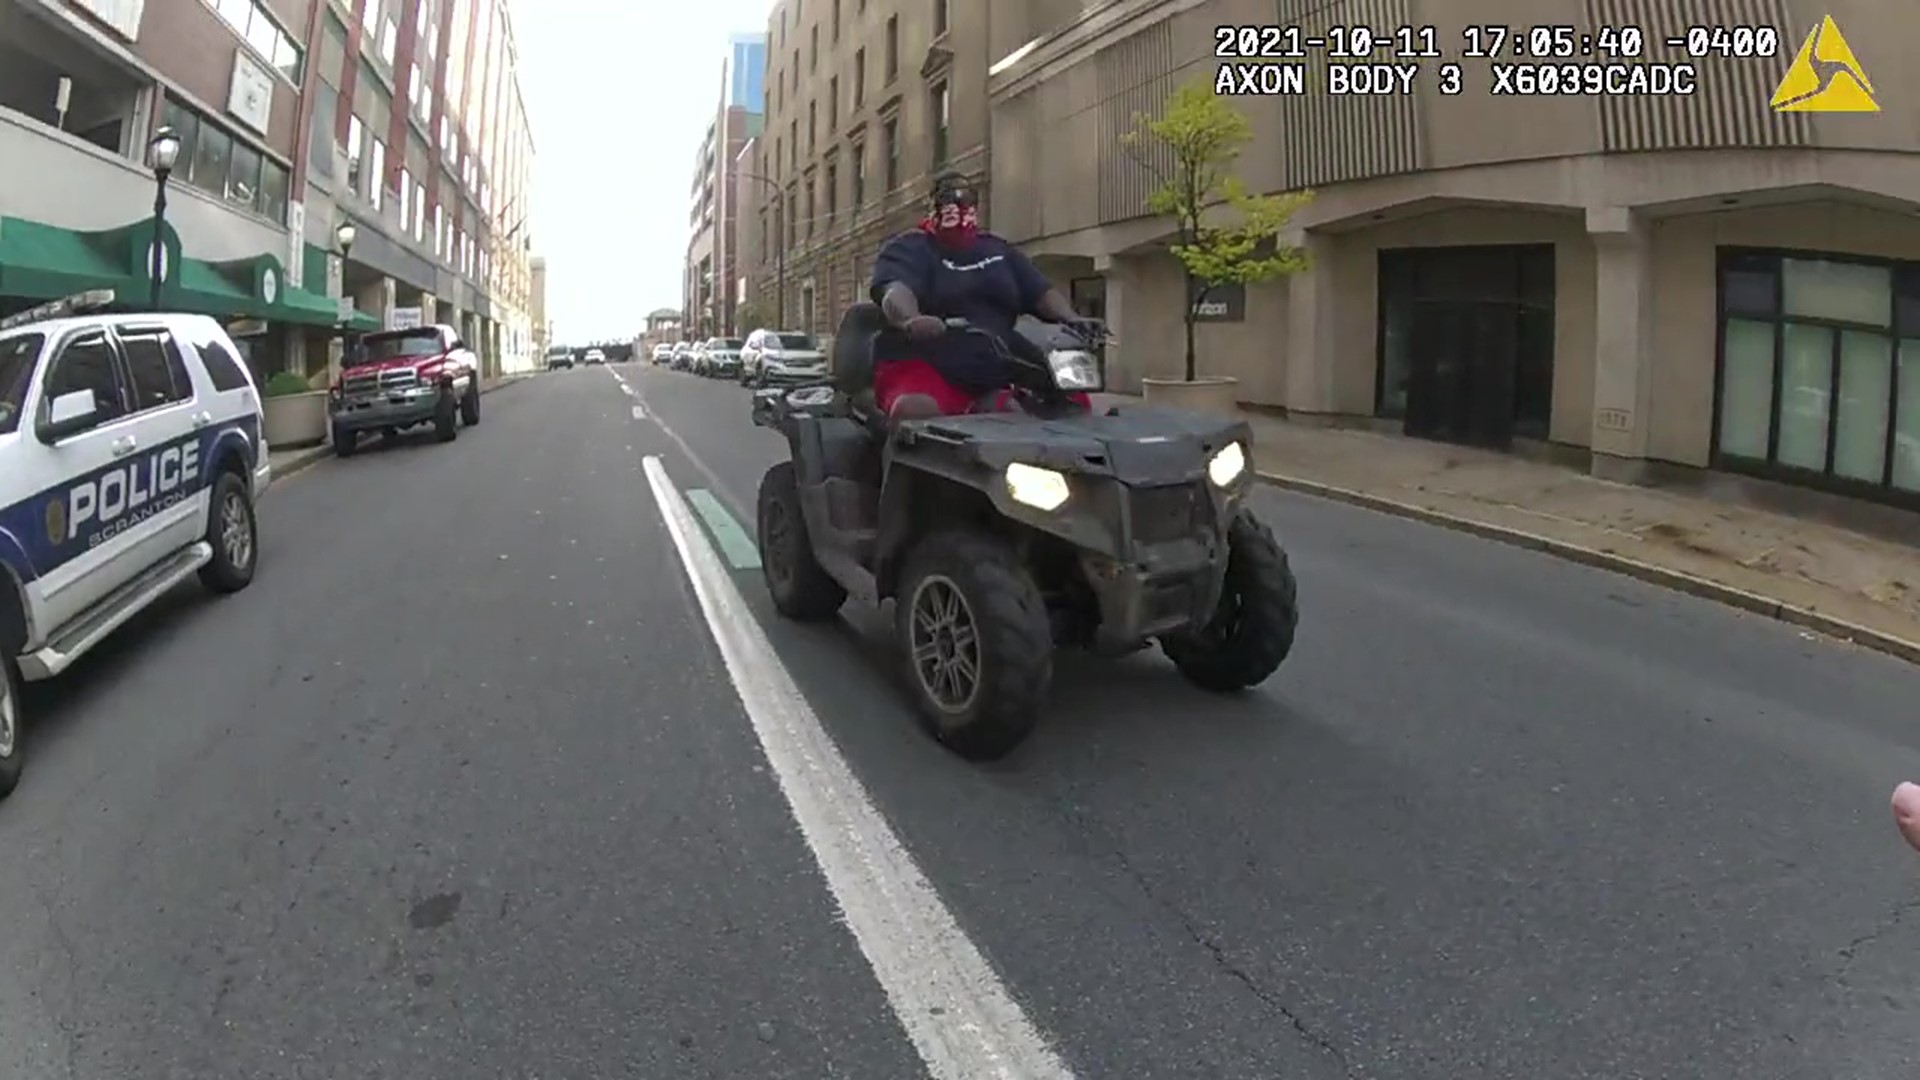 The man who nearly hit a police officer while riding an ATV in Scranton back in October has been sentenced.